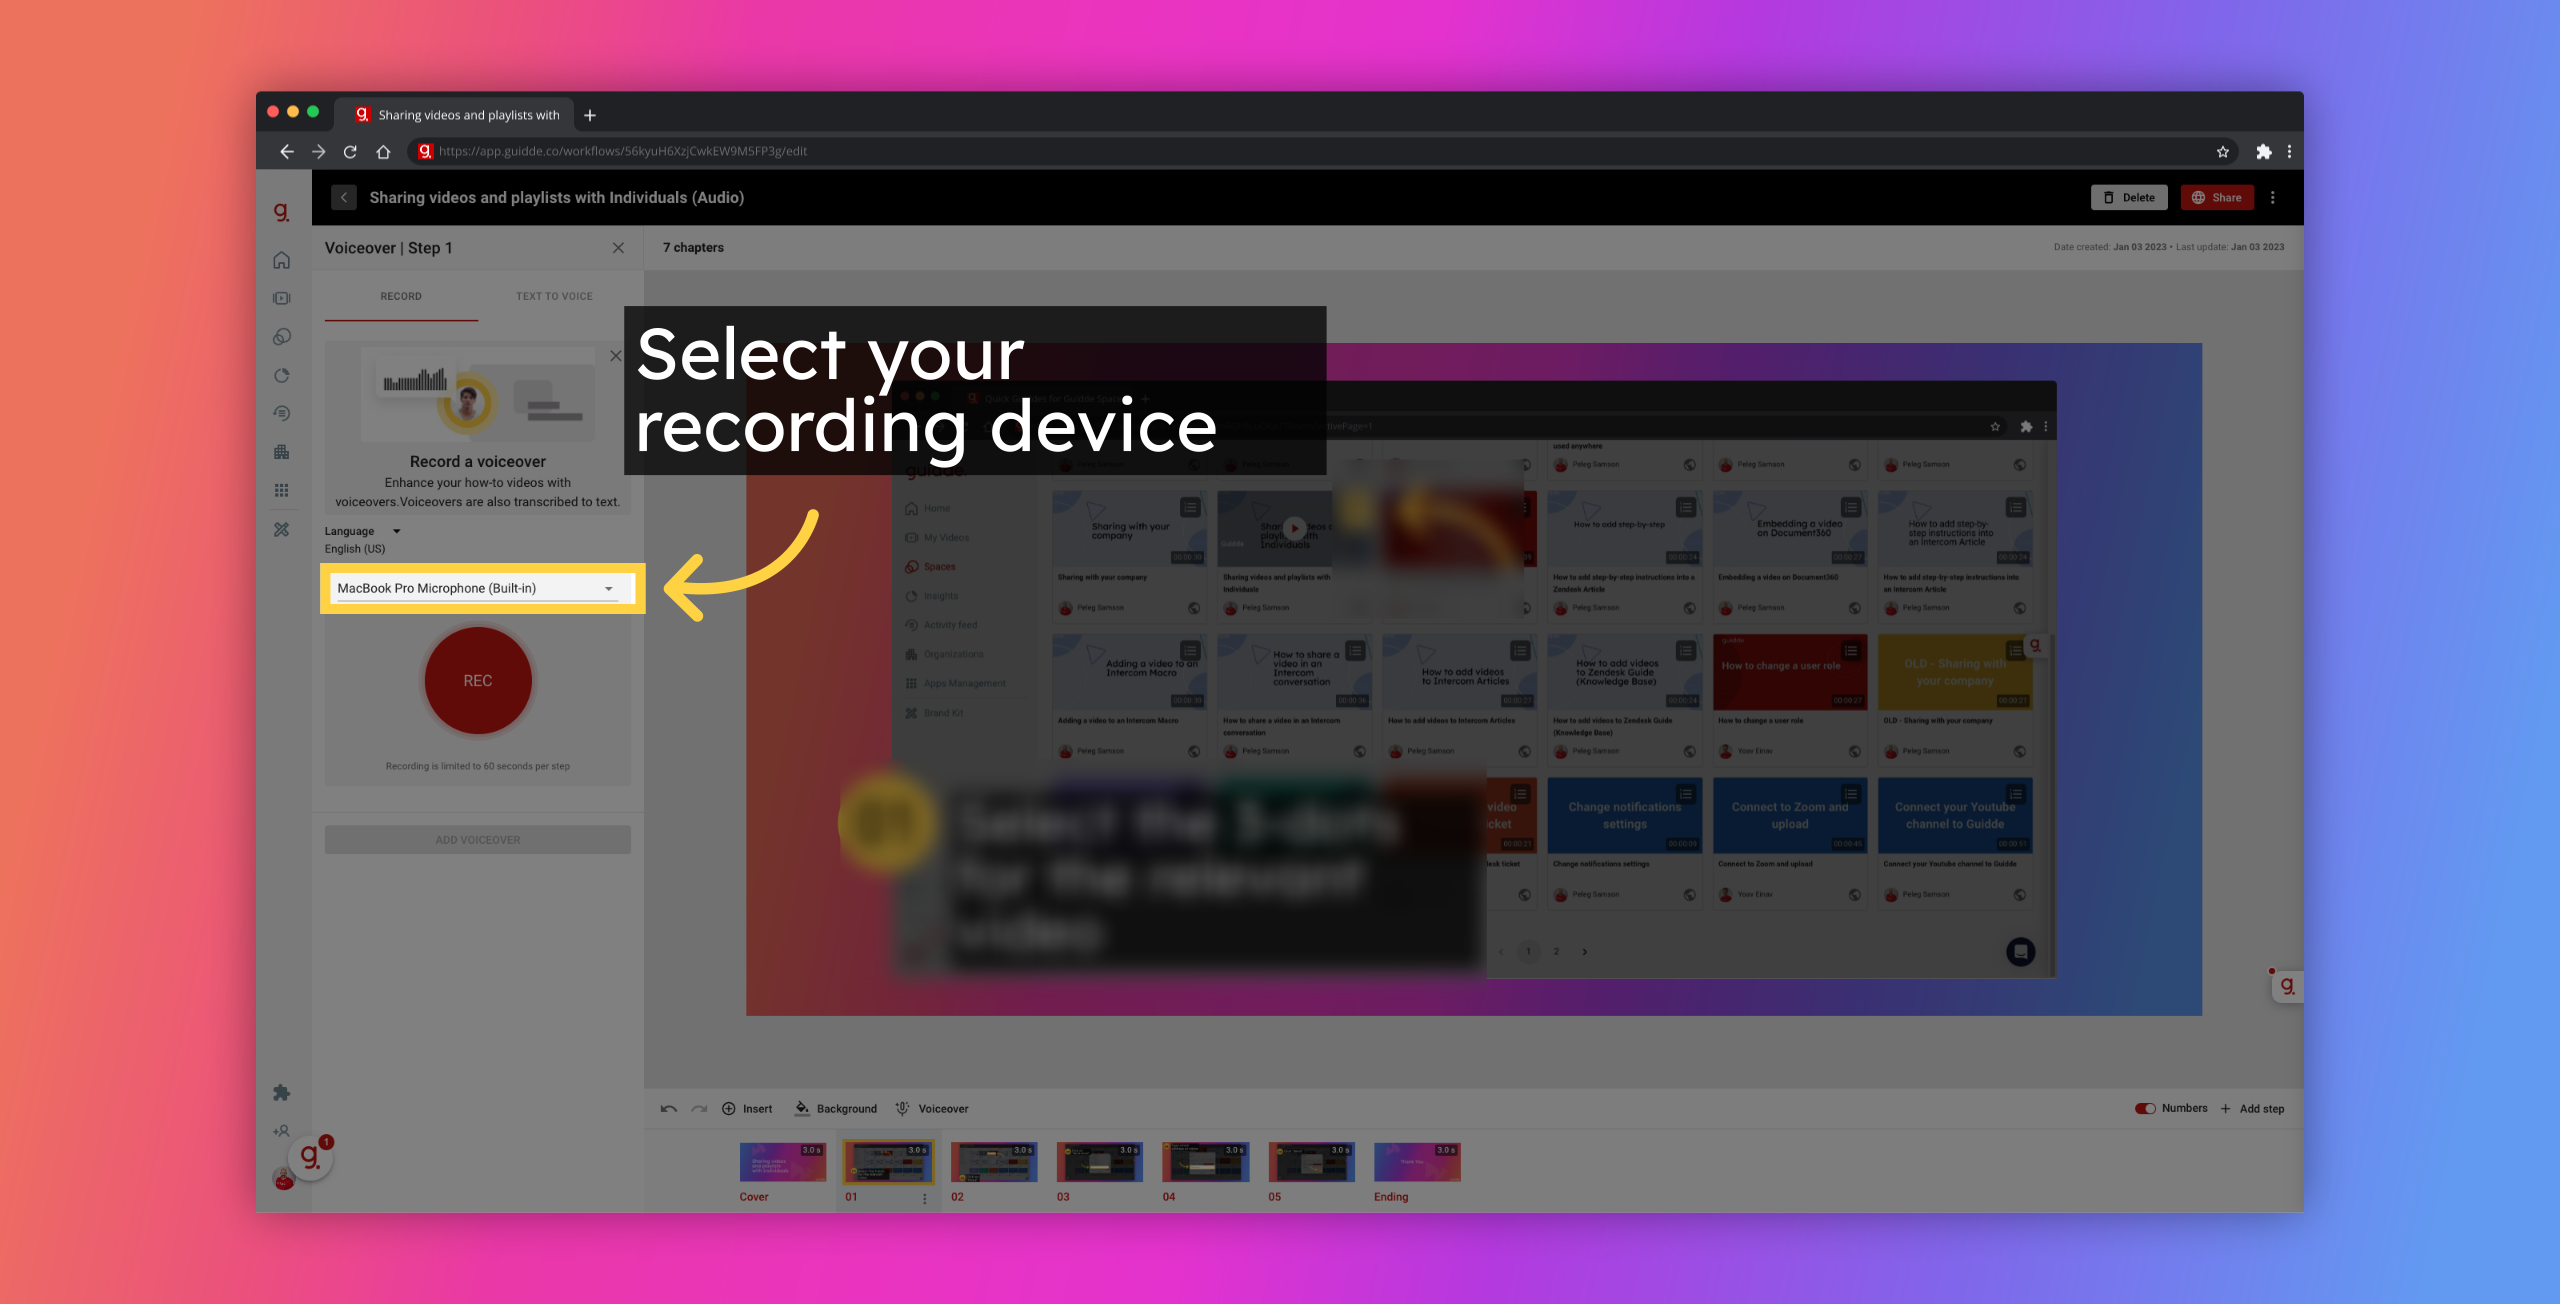 Select your recording device